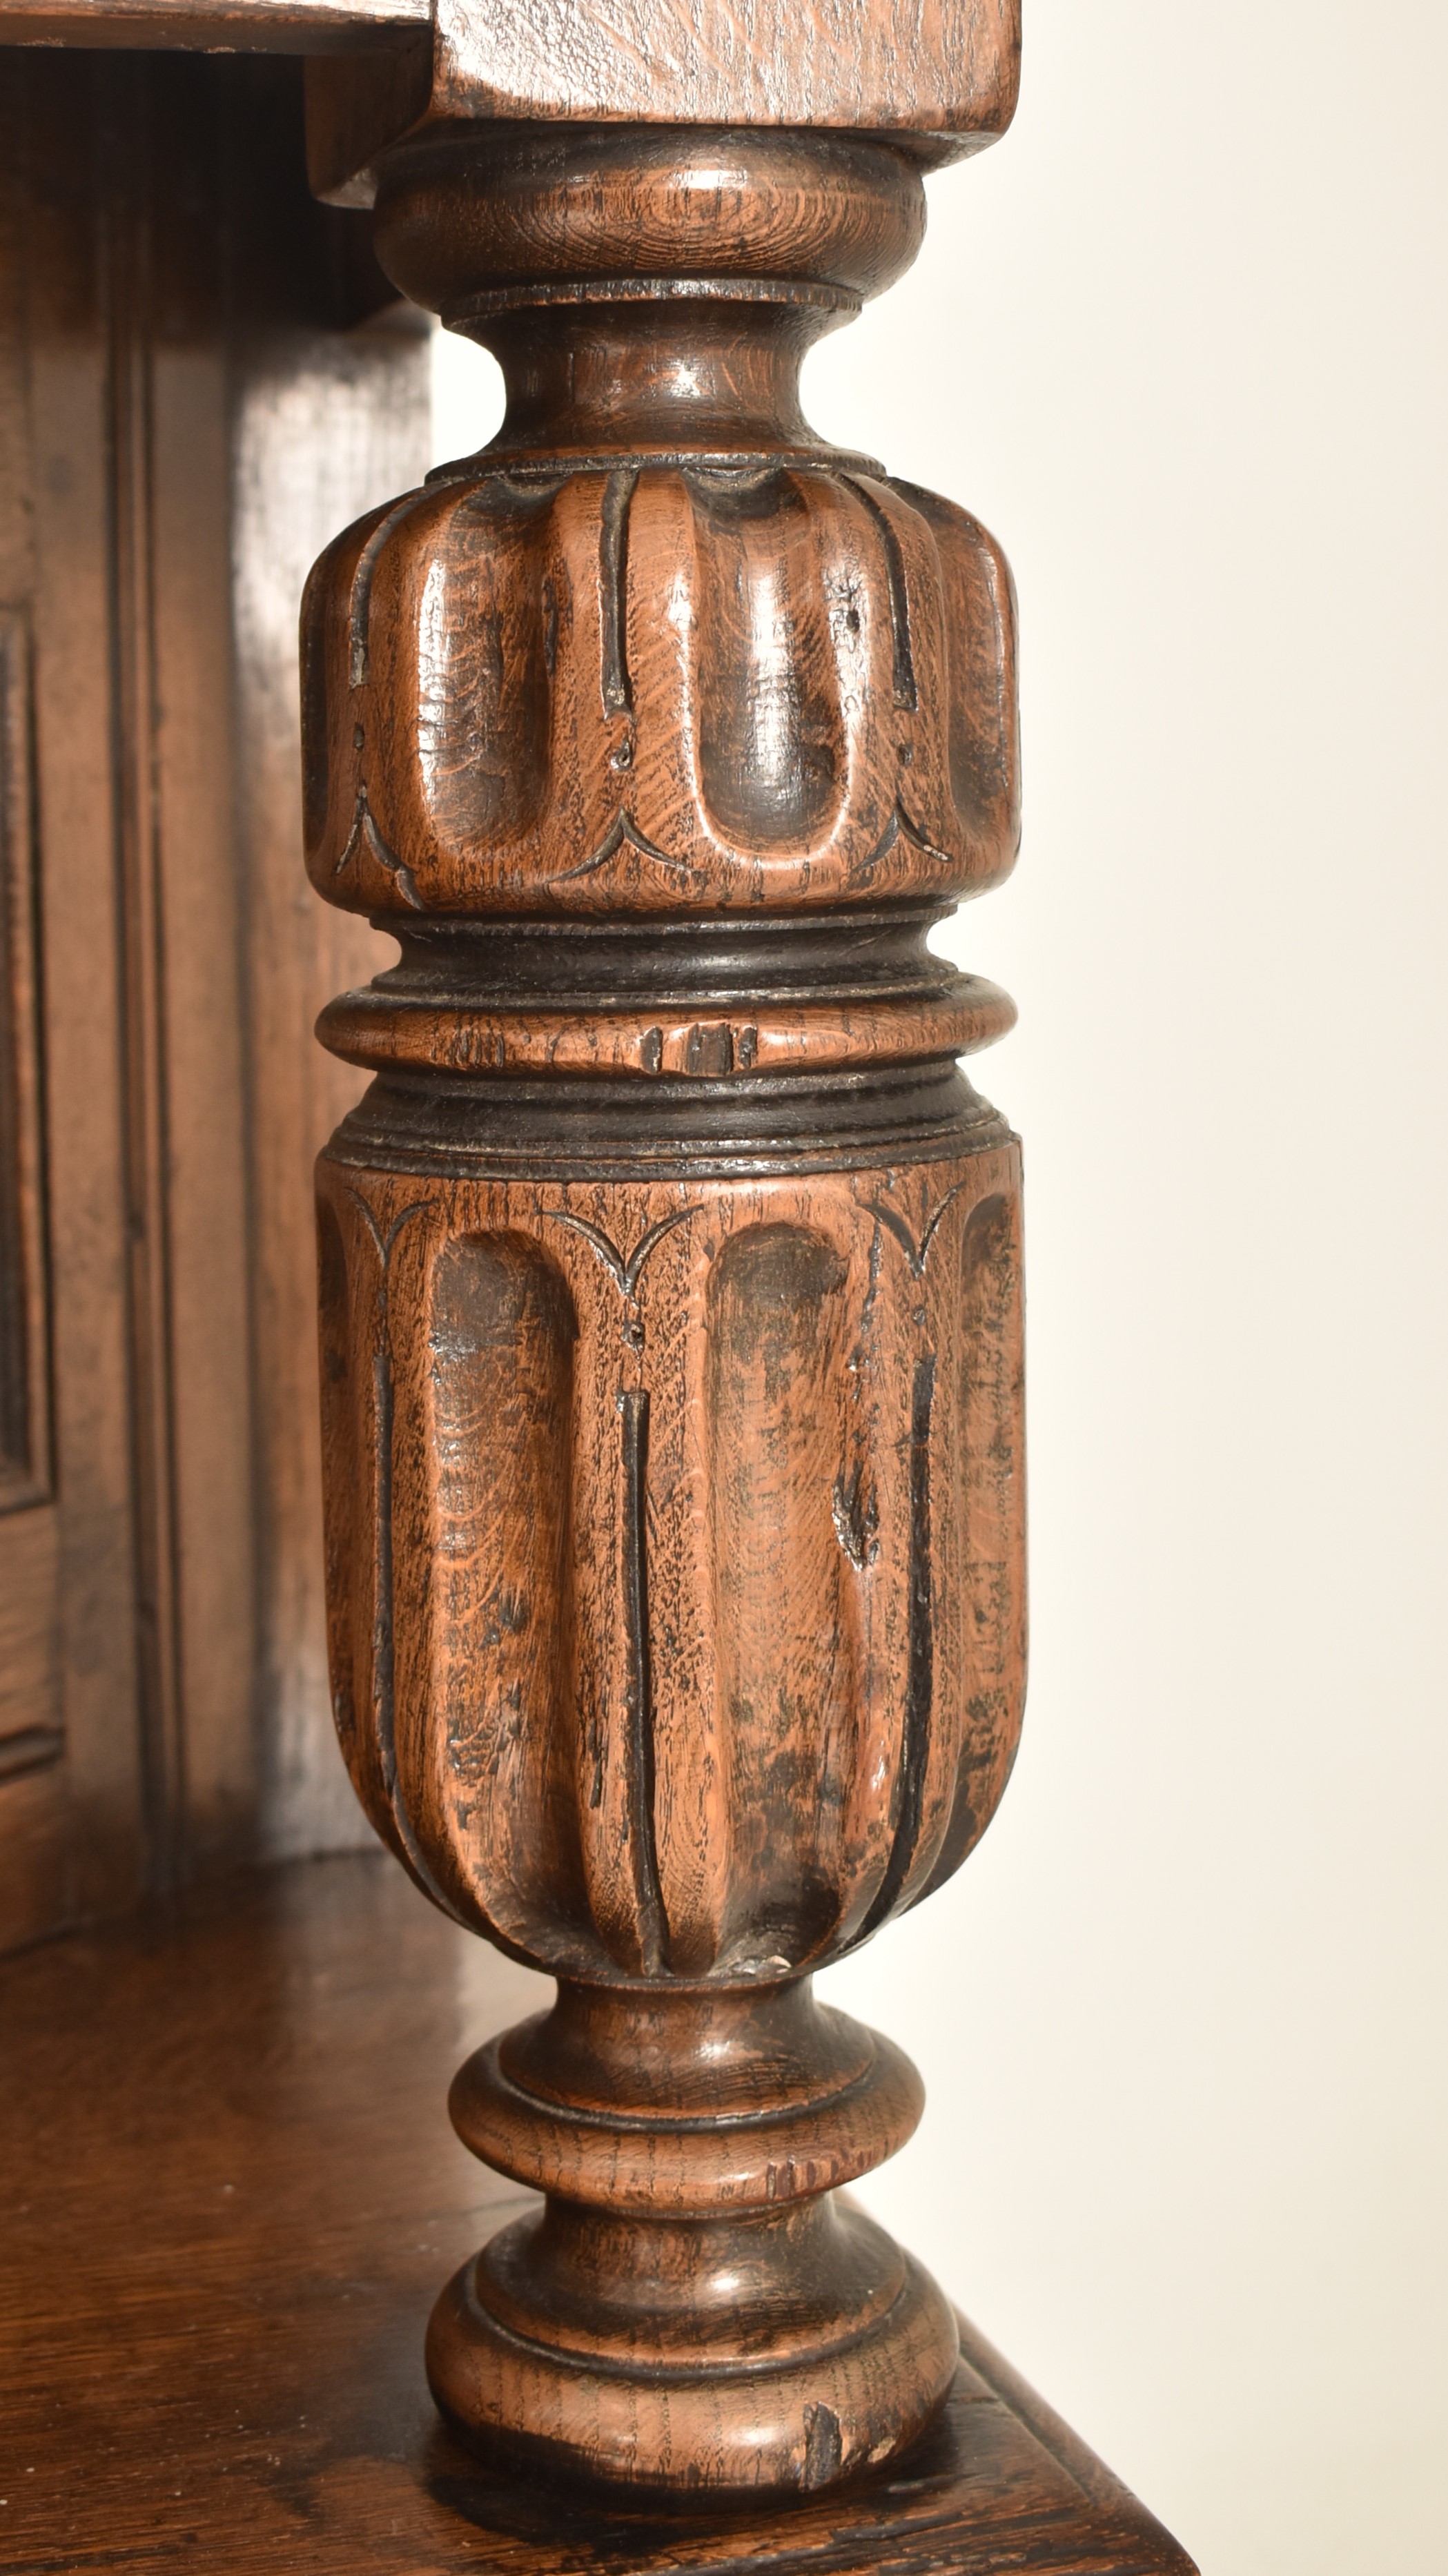 ELIZABETHAN STYLE 19TH CENTURY CARVED OAK COURT CUPBOARD - Image 4 of 7